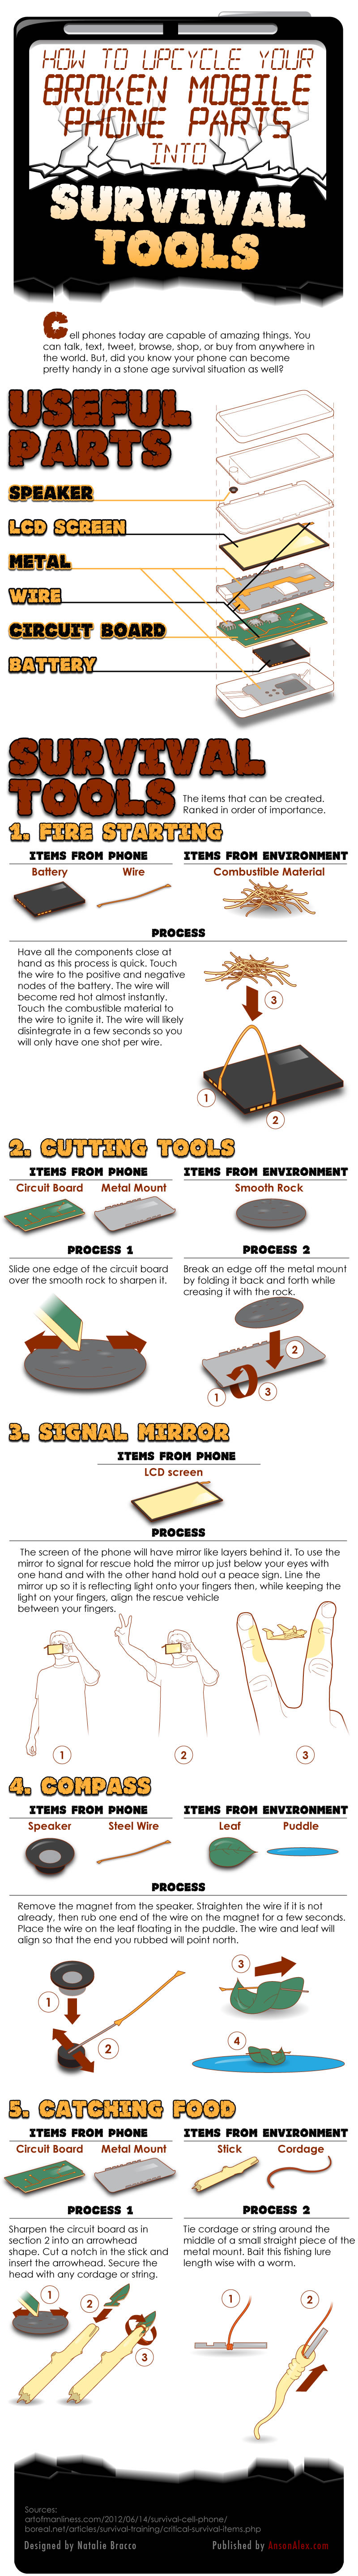 lifehacking-smartphone-survival-tips-infographic